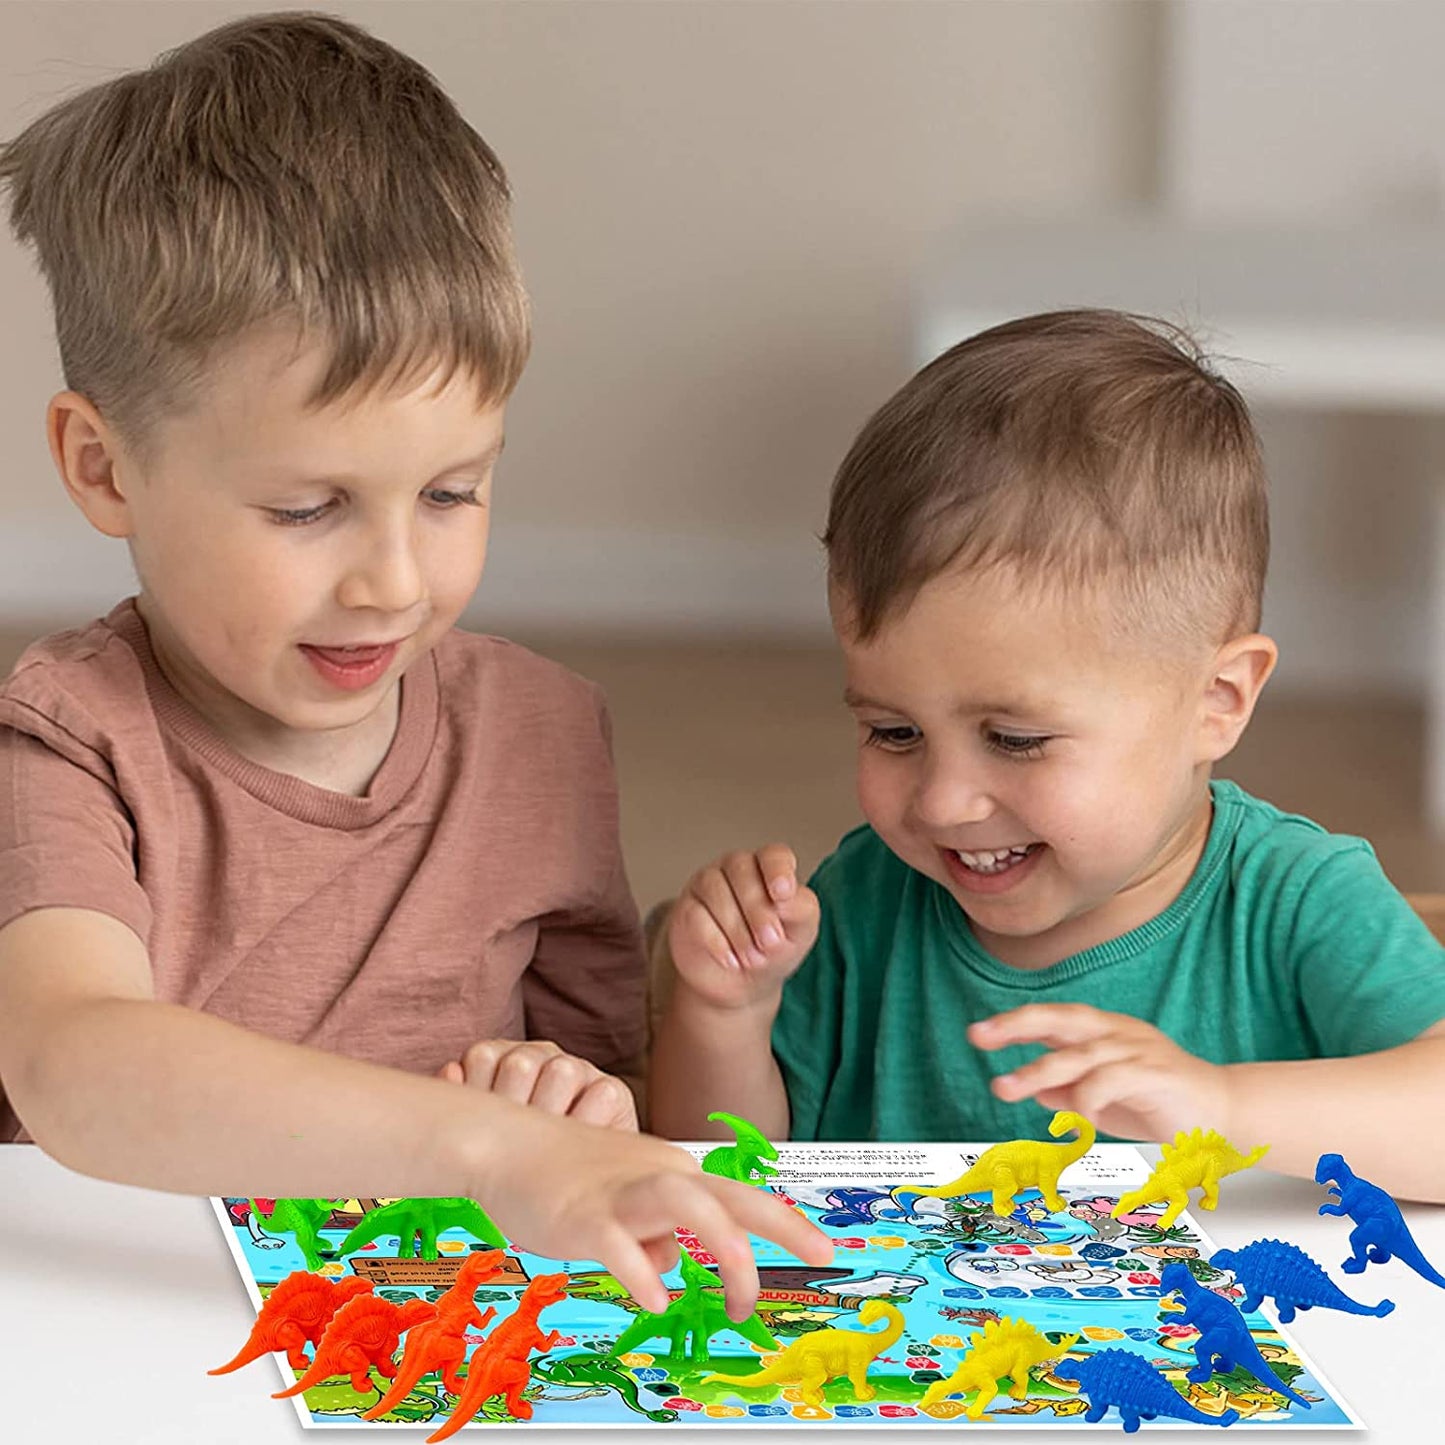 Blooming lilies Dinosuar Toys Flying Chess Travel Playset for 3 4 5 6 Years olds Boys Girls Kids - with Solid Dinosaurs Figures and Park Map,Great Board Game Adults